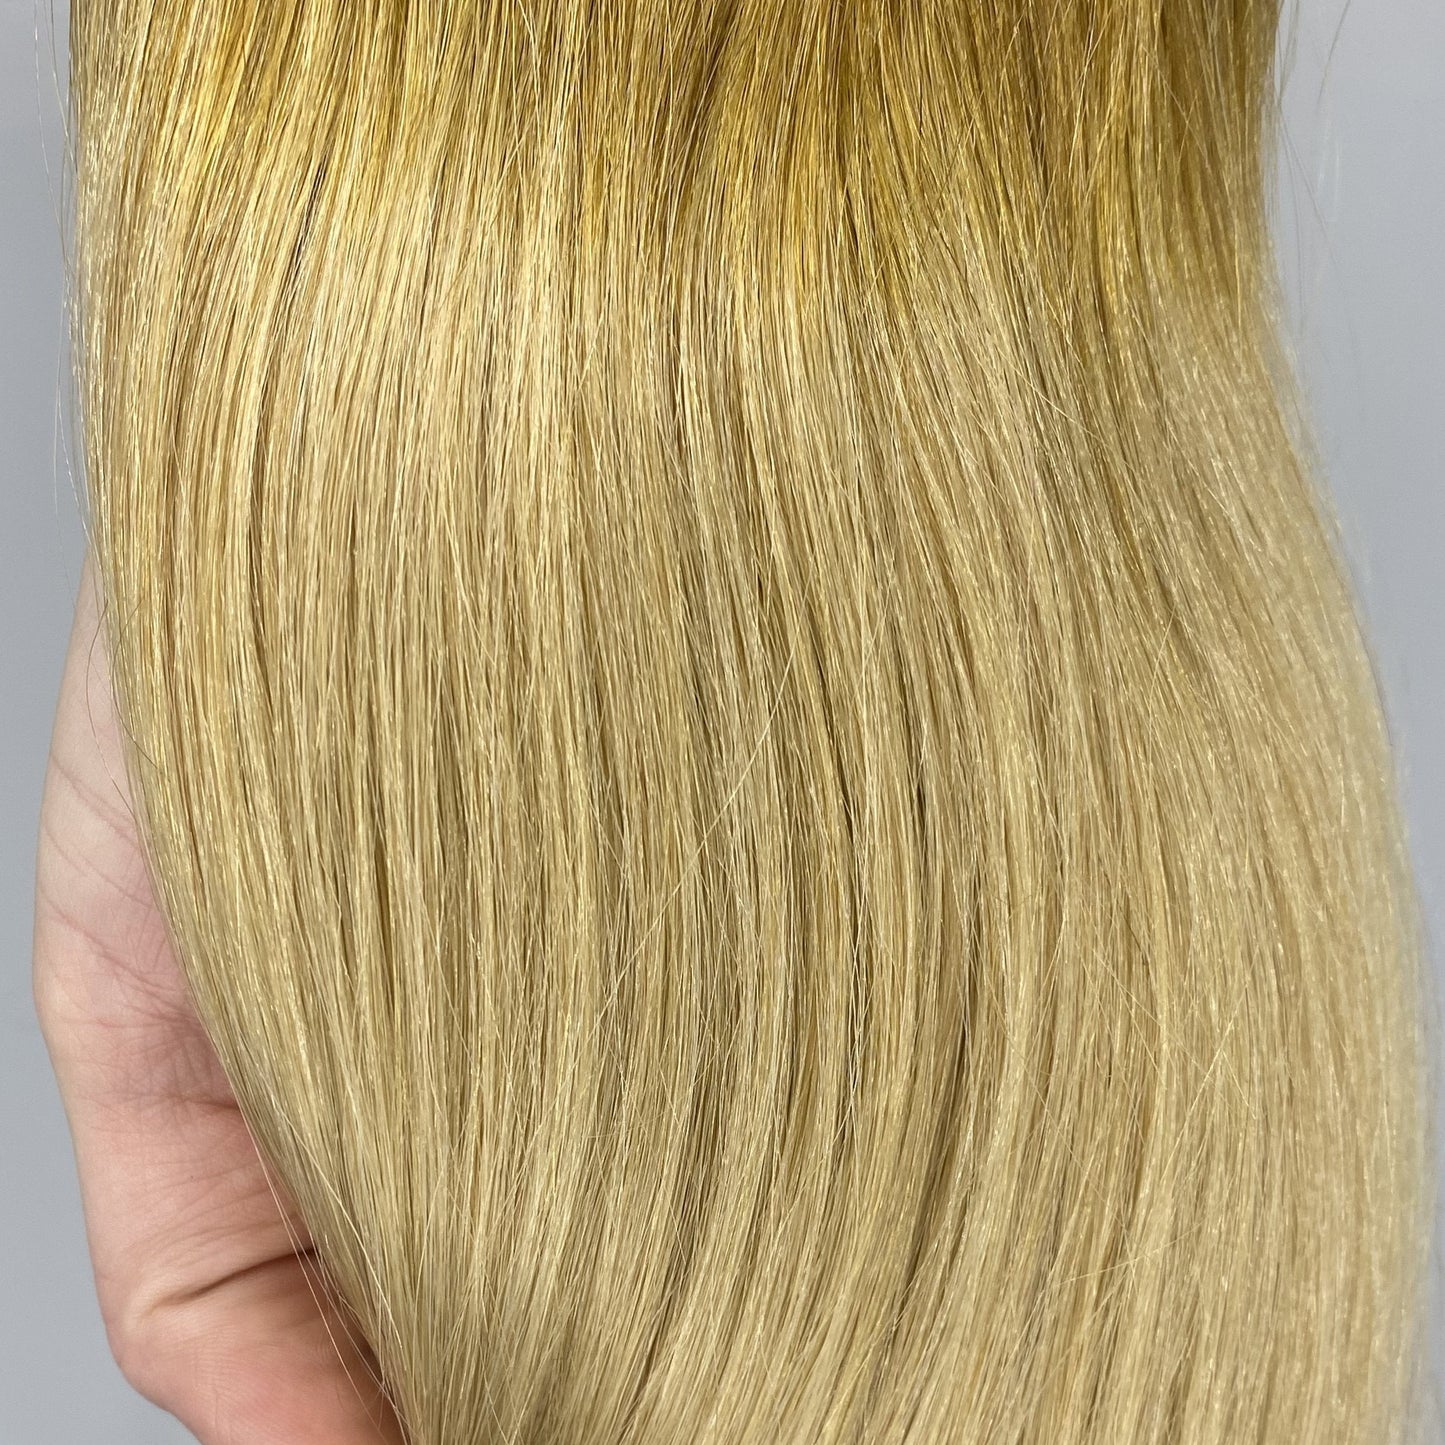 Velo #6&16 - 20 inches - Copper Golden Blonde into Light Golden Blonde Ombre Velo DR Hair Products Co 